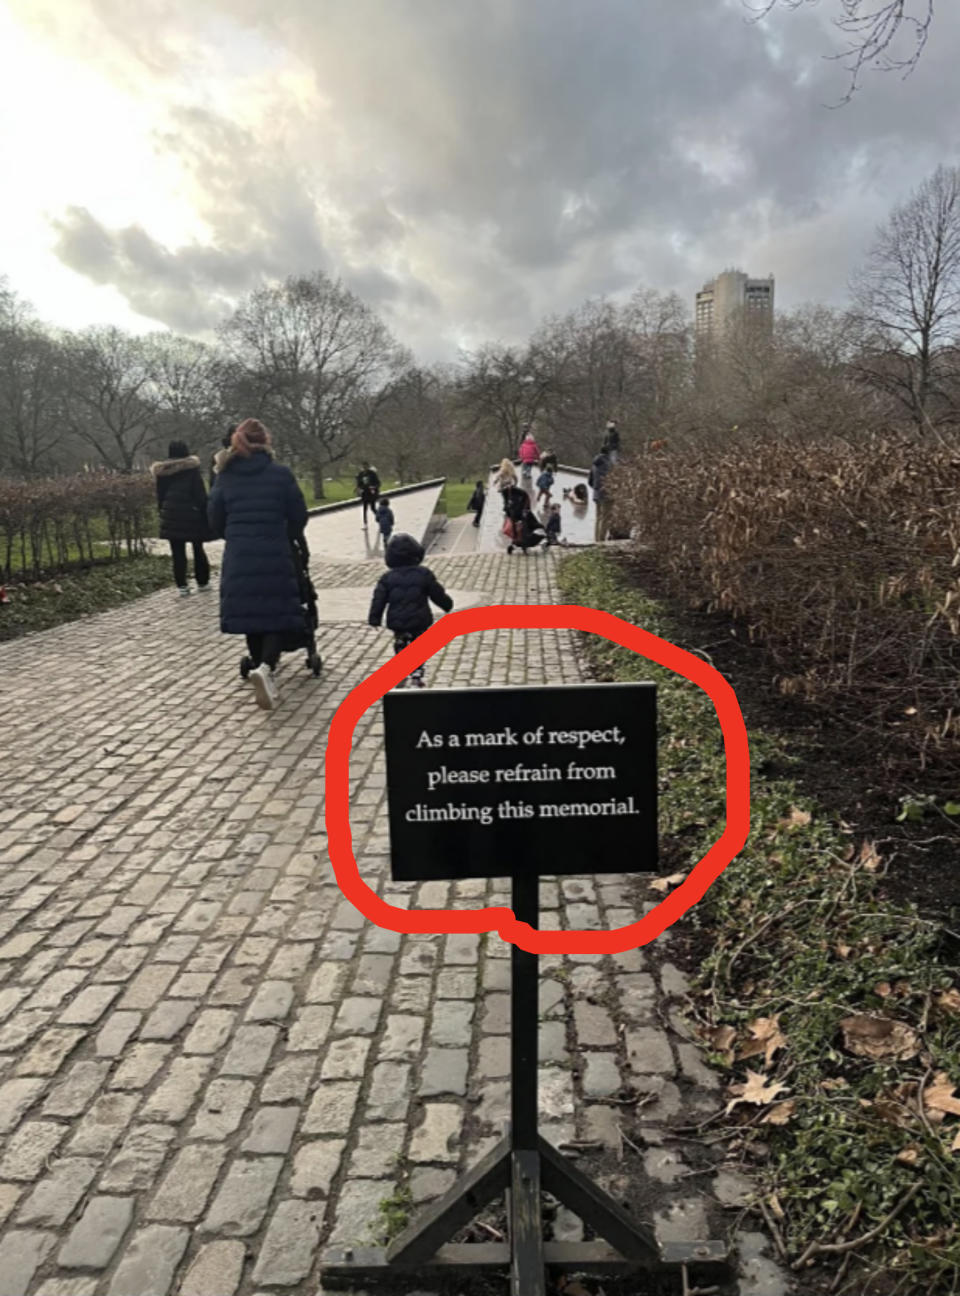 People walk along a cobblestone path with a sign in the foreground reading, "As a mark of respect, please refrain from climbing this memorial."